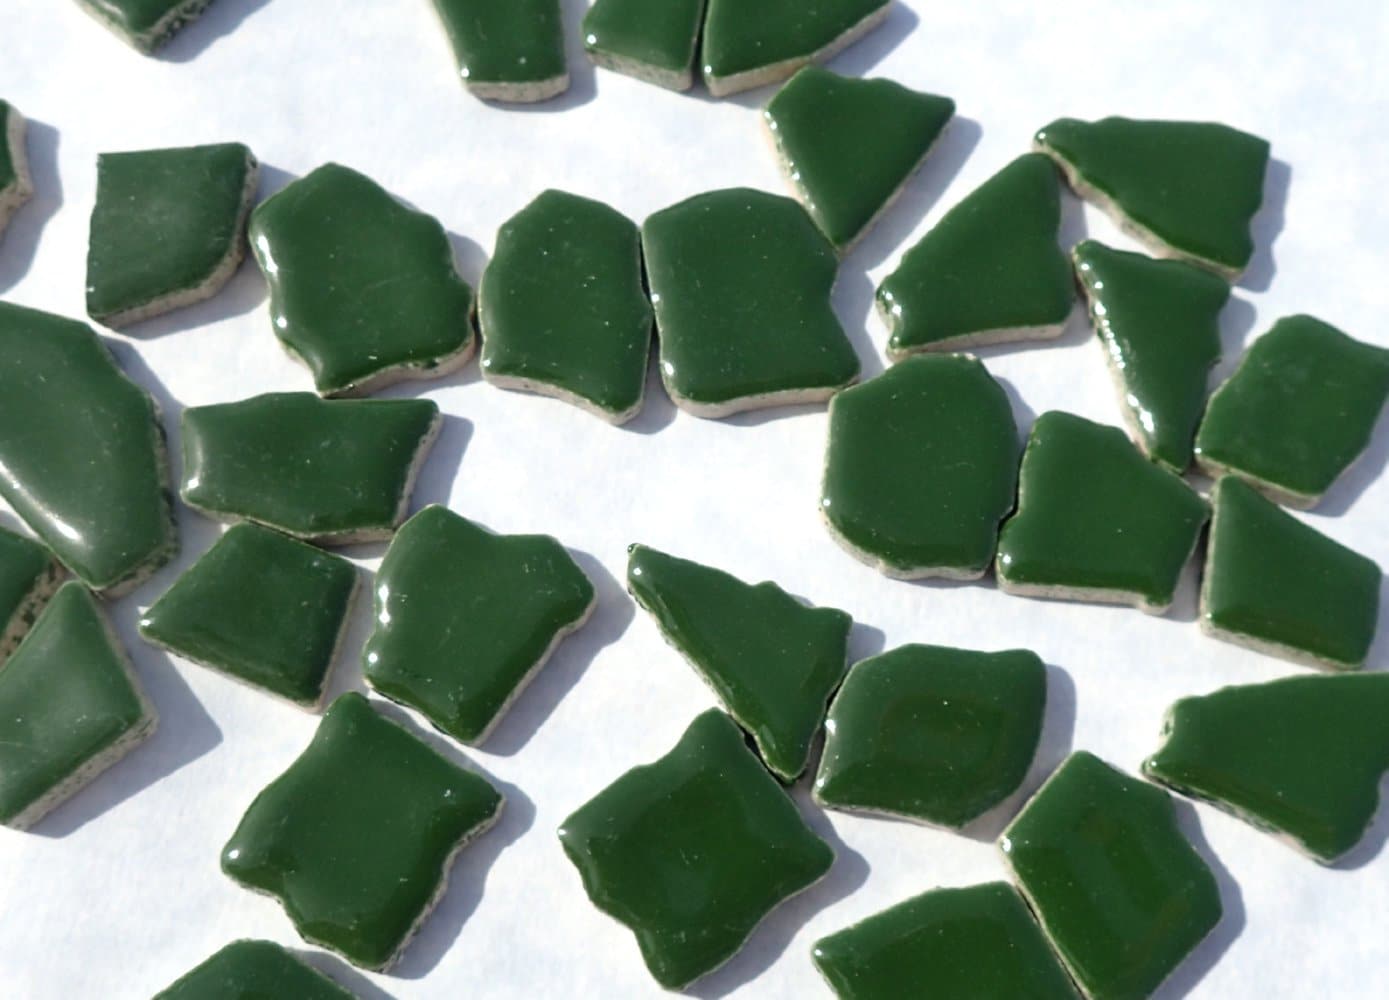 Dark Green Mosaic Ceramic Tiles - Jigsaw Puzzle Shaped Pieces - Half Pound - Assorted Sizes Random Shapes in Pesto